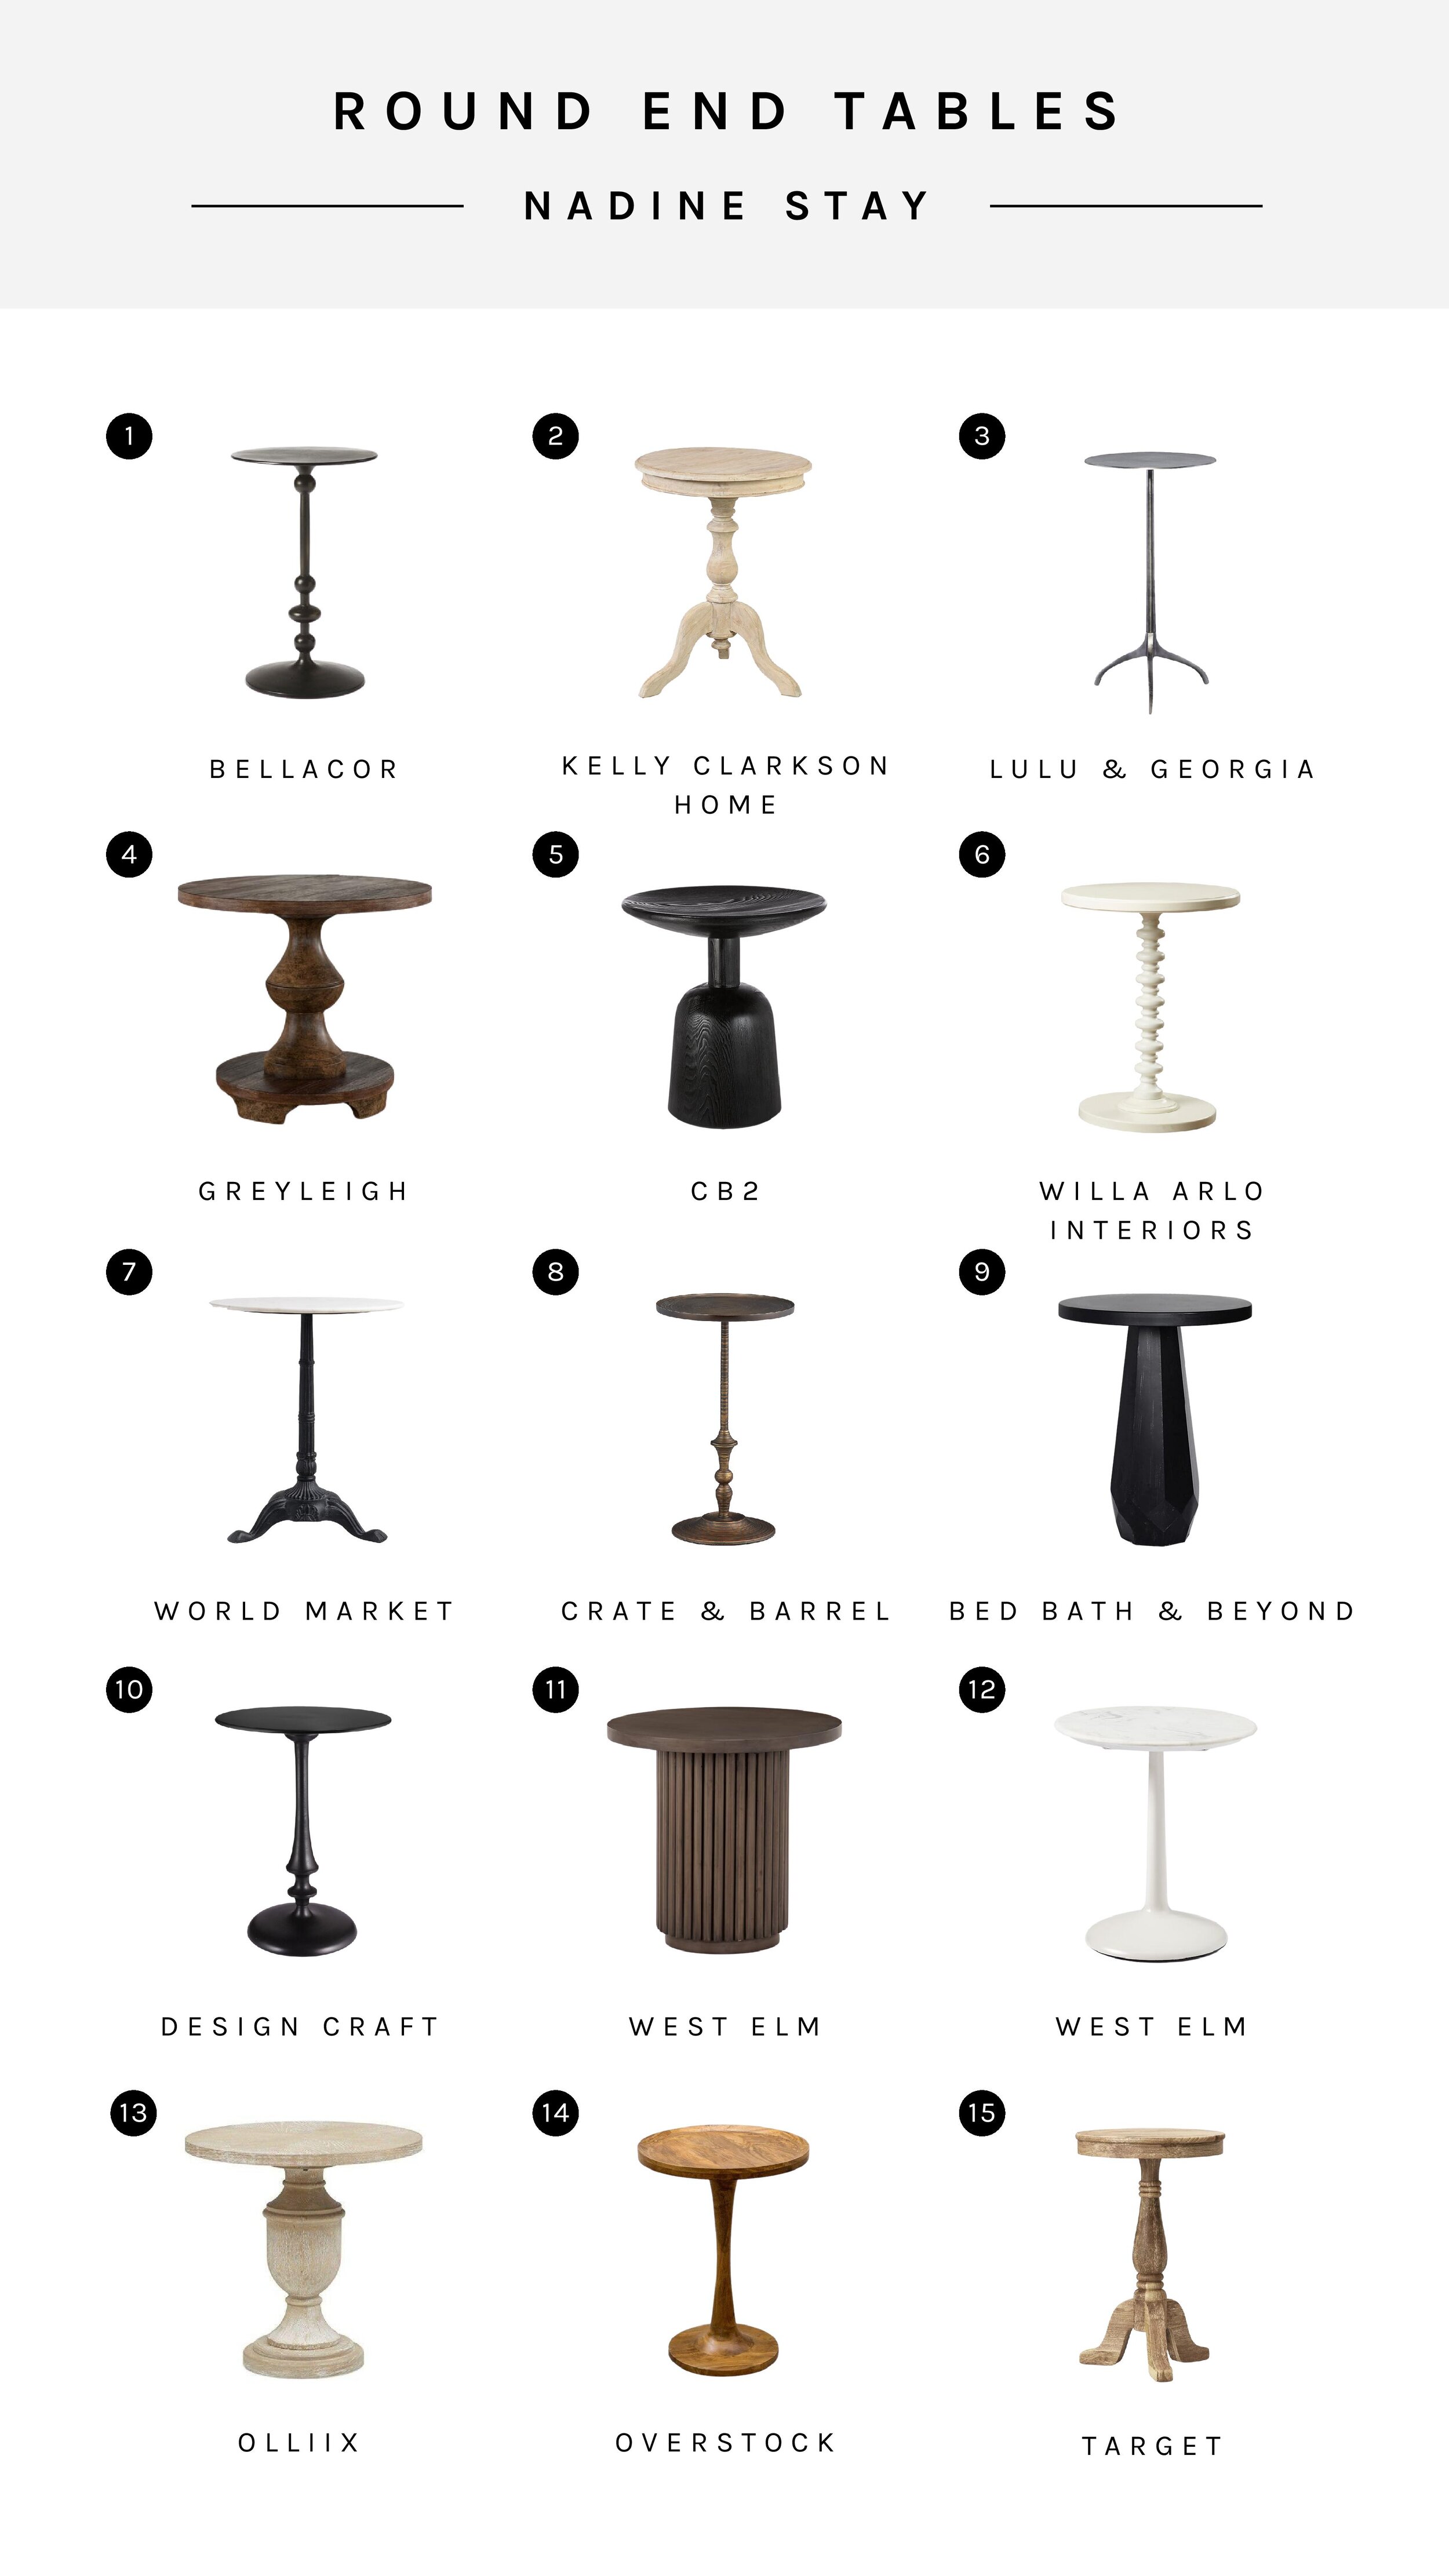 Round Table Talk - My vintage pedestal end table and 15 other little round end tables. Modern Traditional round pedestal, hourglass, spindle, and metal end tables | Nadine Stay